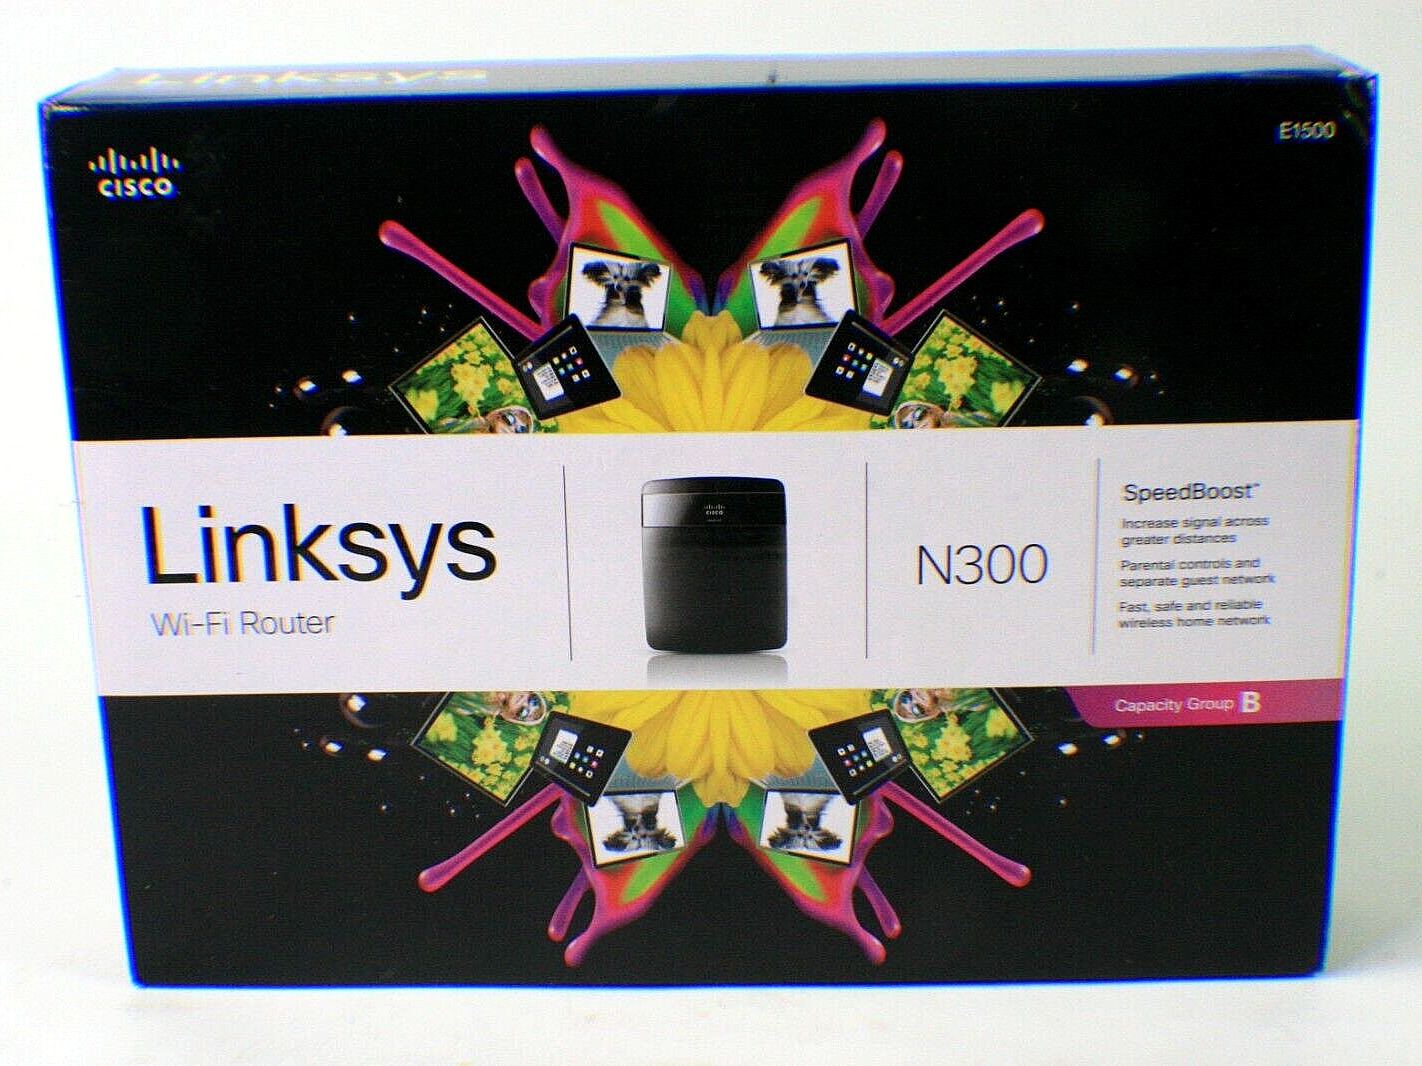 CISCO Linksys E1500-NP 300 Mbps 4-Port 10/100 Wireless Router a5